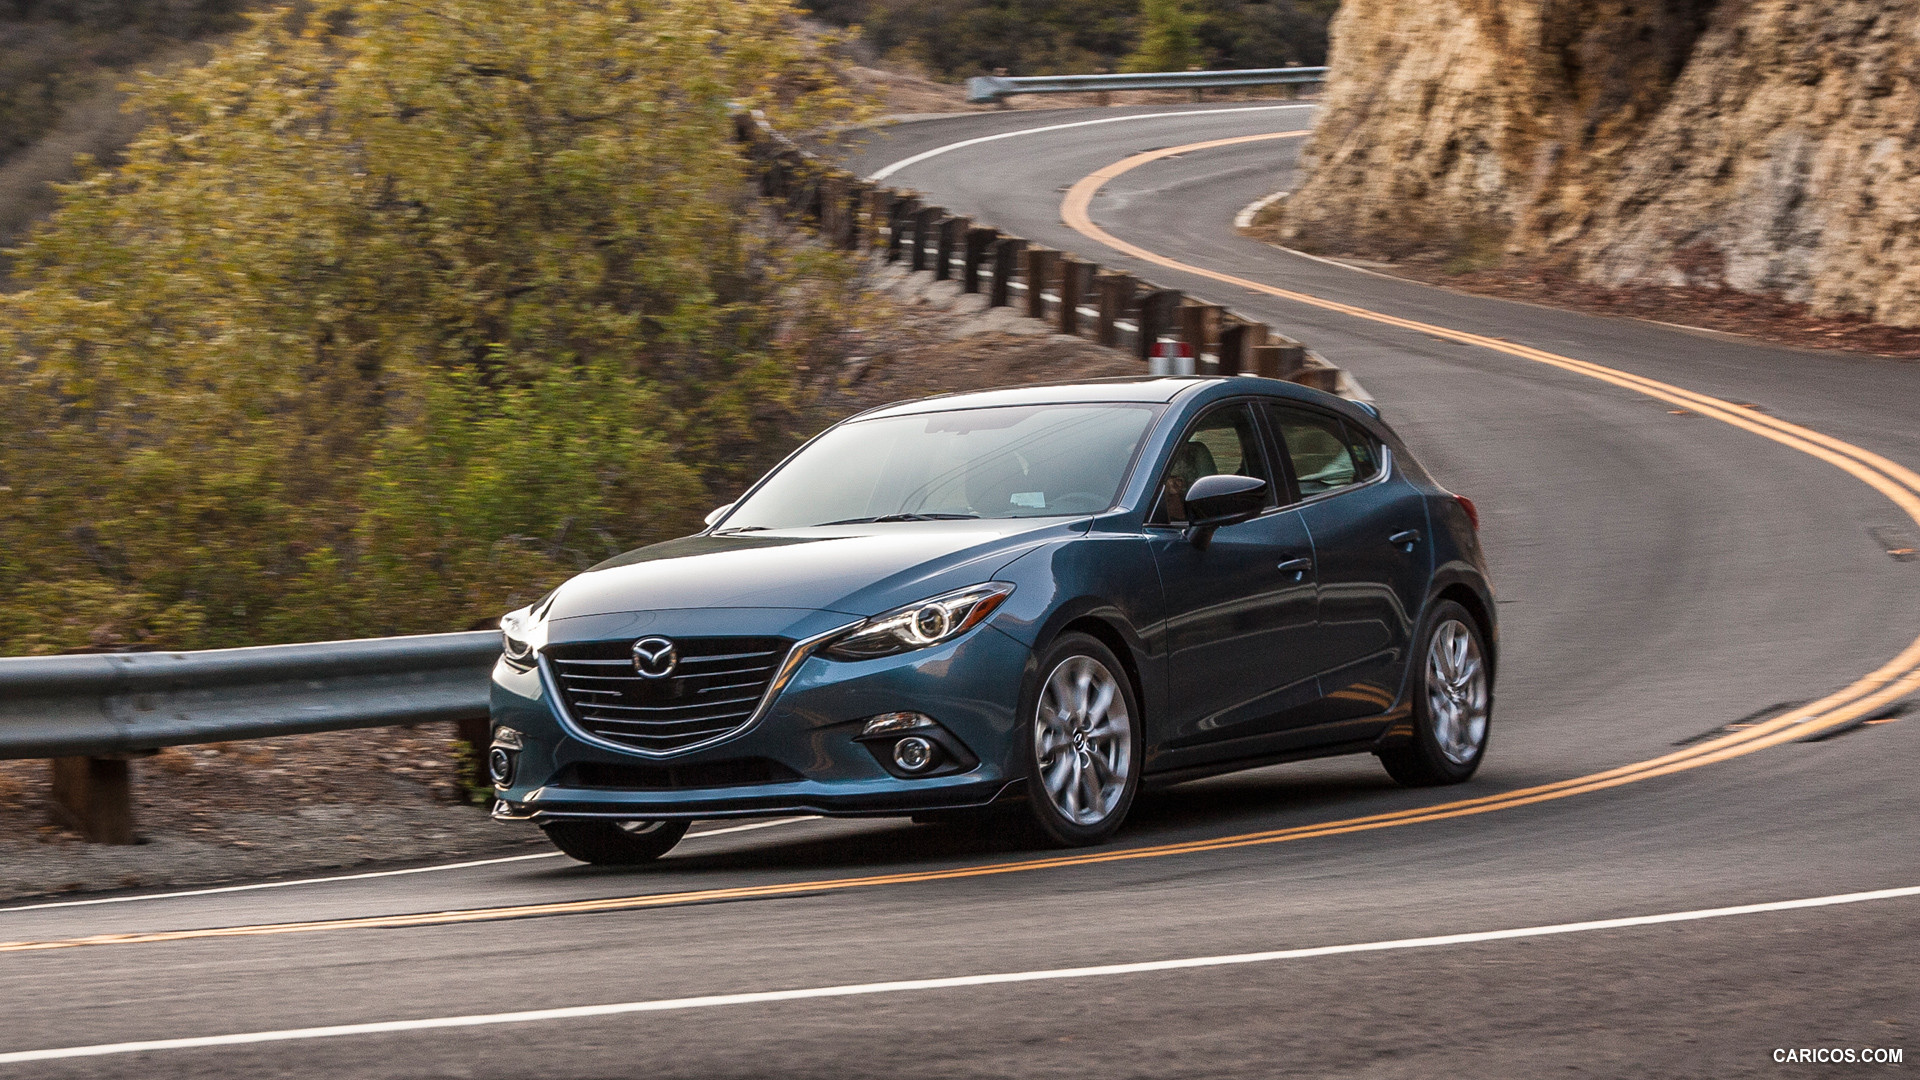 2015 Mazda 3 5D s Touring 6MT (Blue Reflex)  - Front, #1 of 27